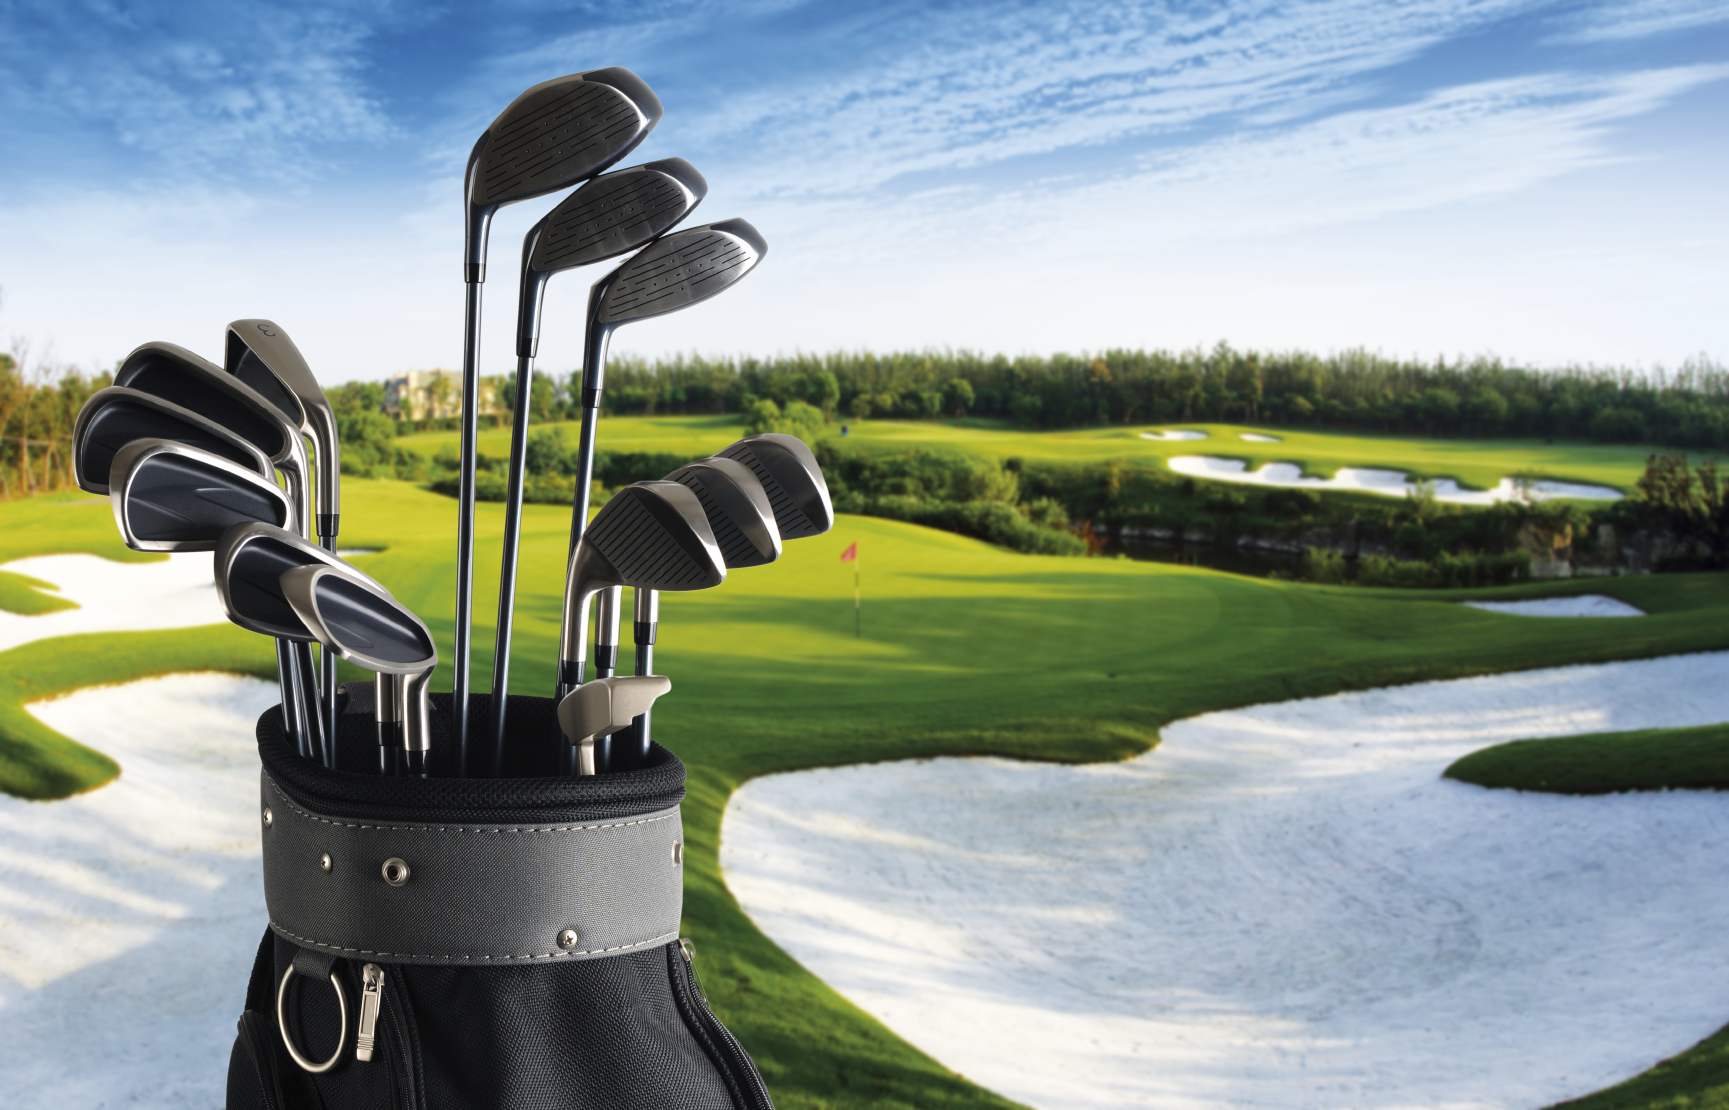 Golf Clubs and Equipment Online - Affordable Golf